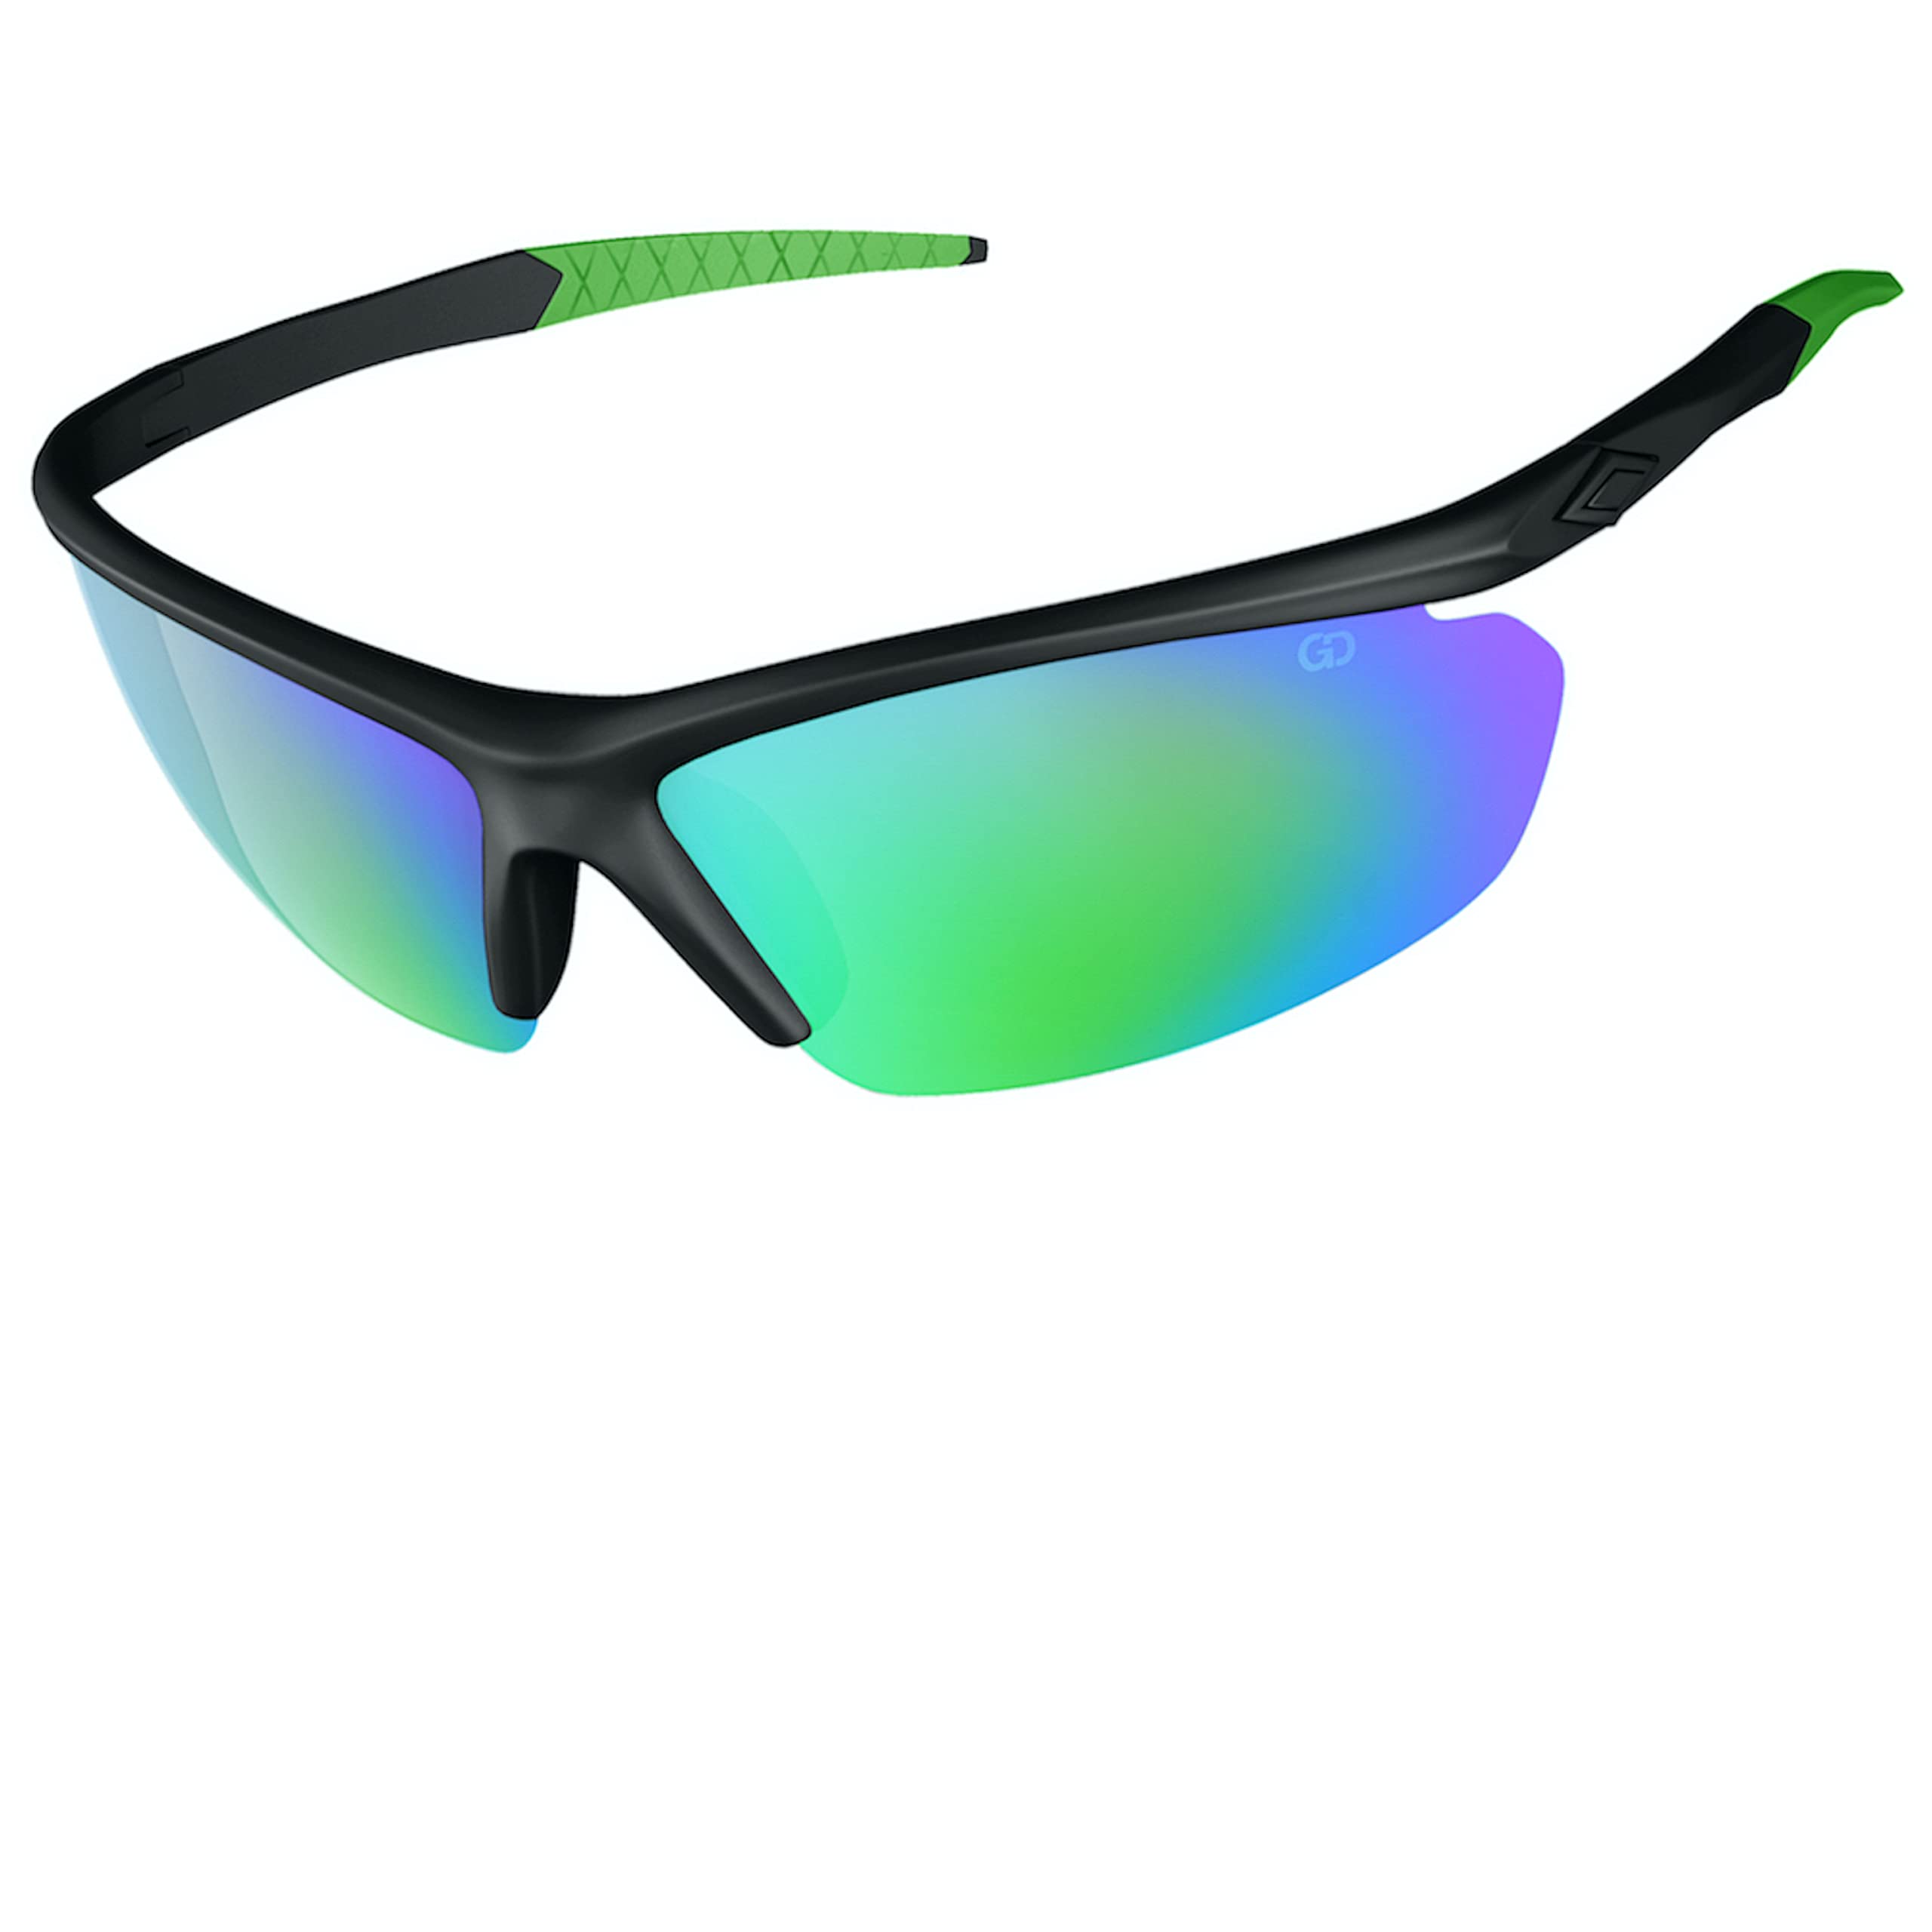 Gear District Polarized UV400 Sport Sunglasses Anti-Fog Ideal for Driving  or Sports Activity Green Green